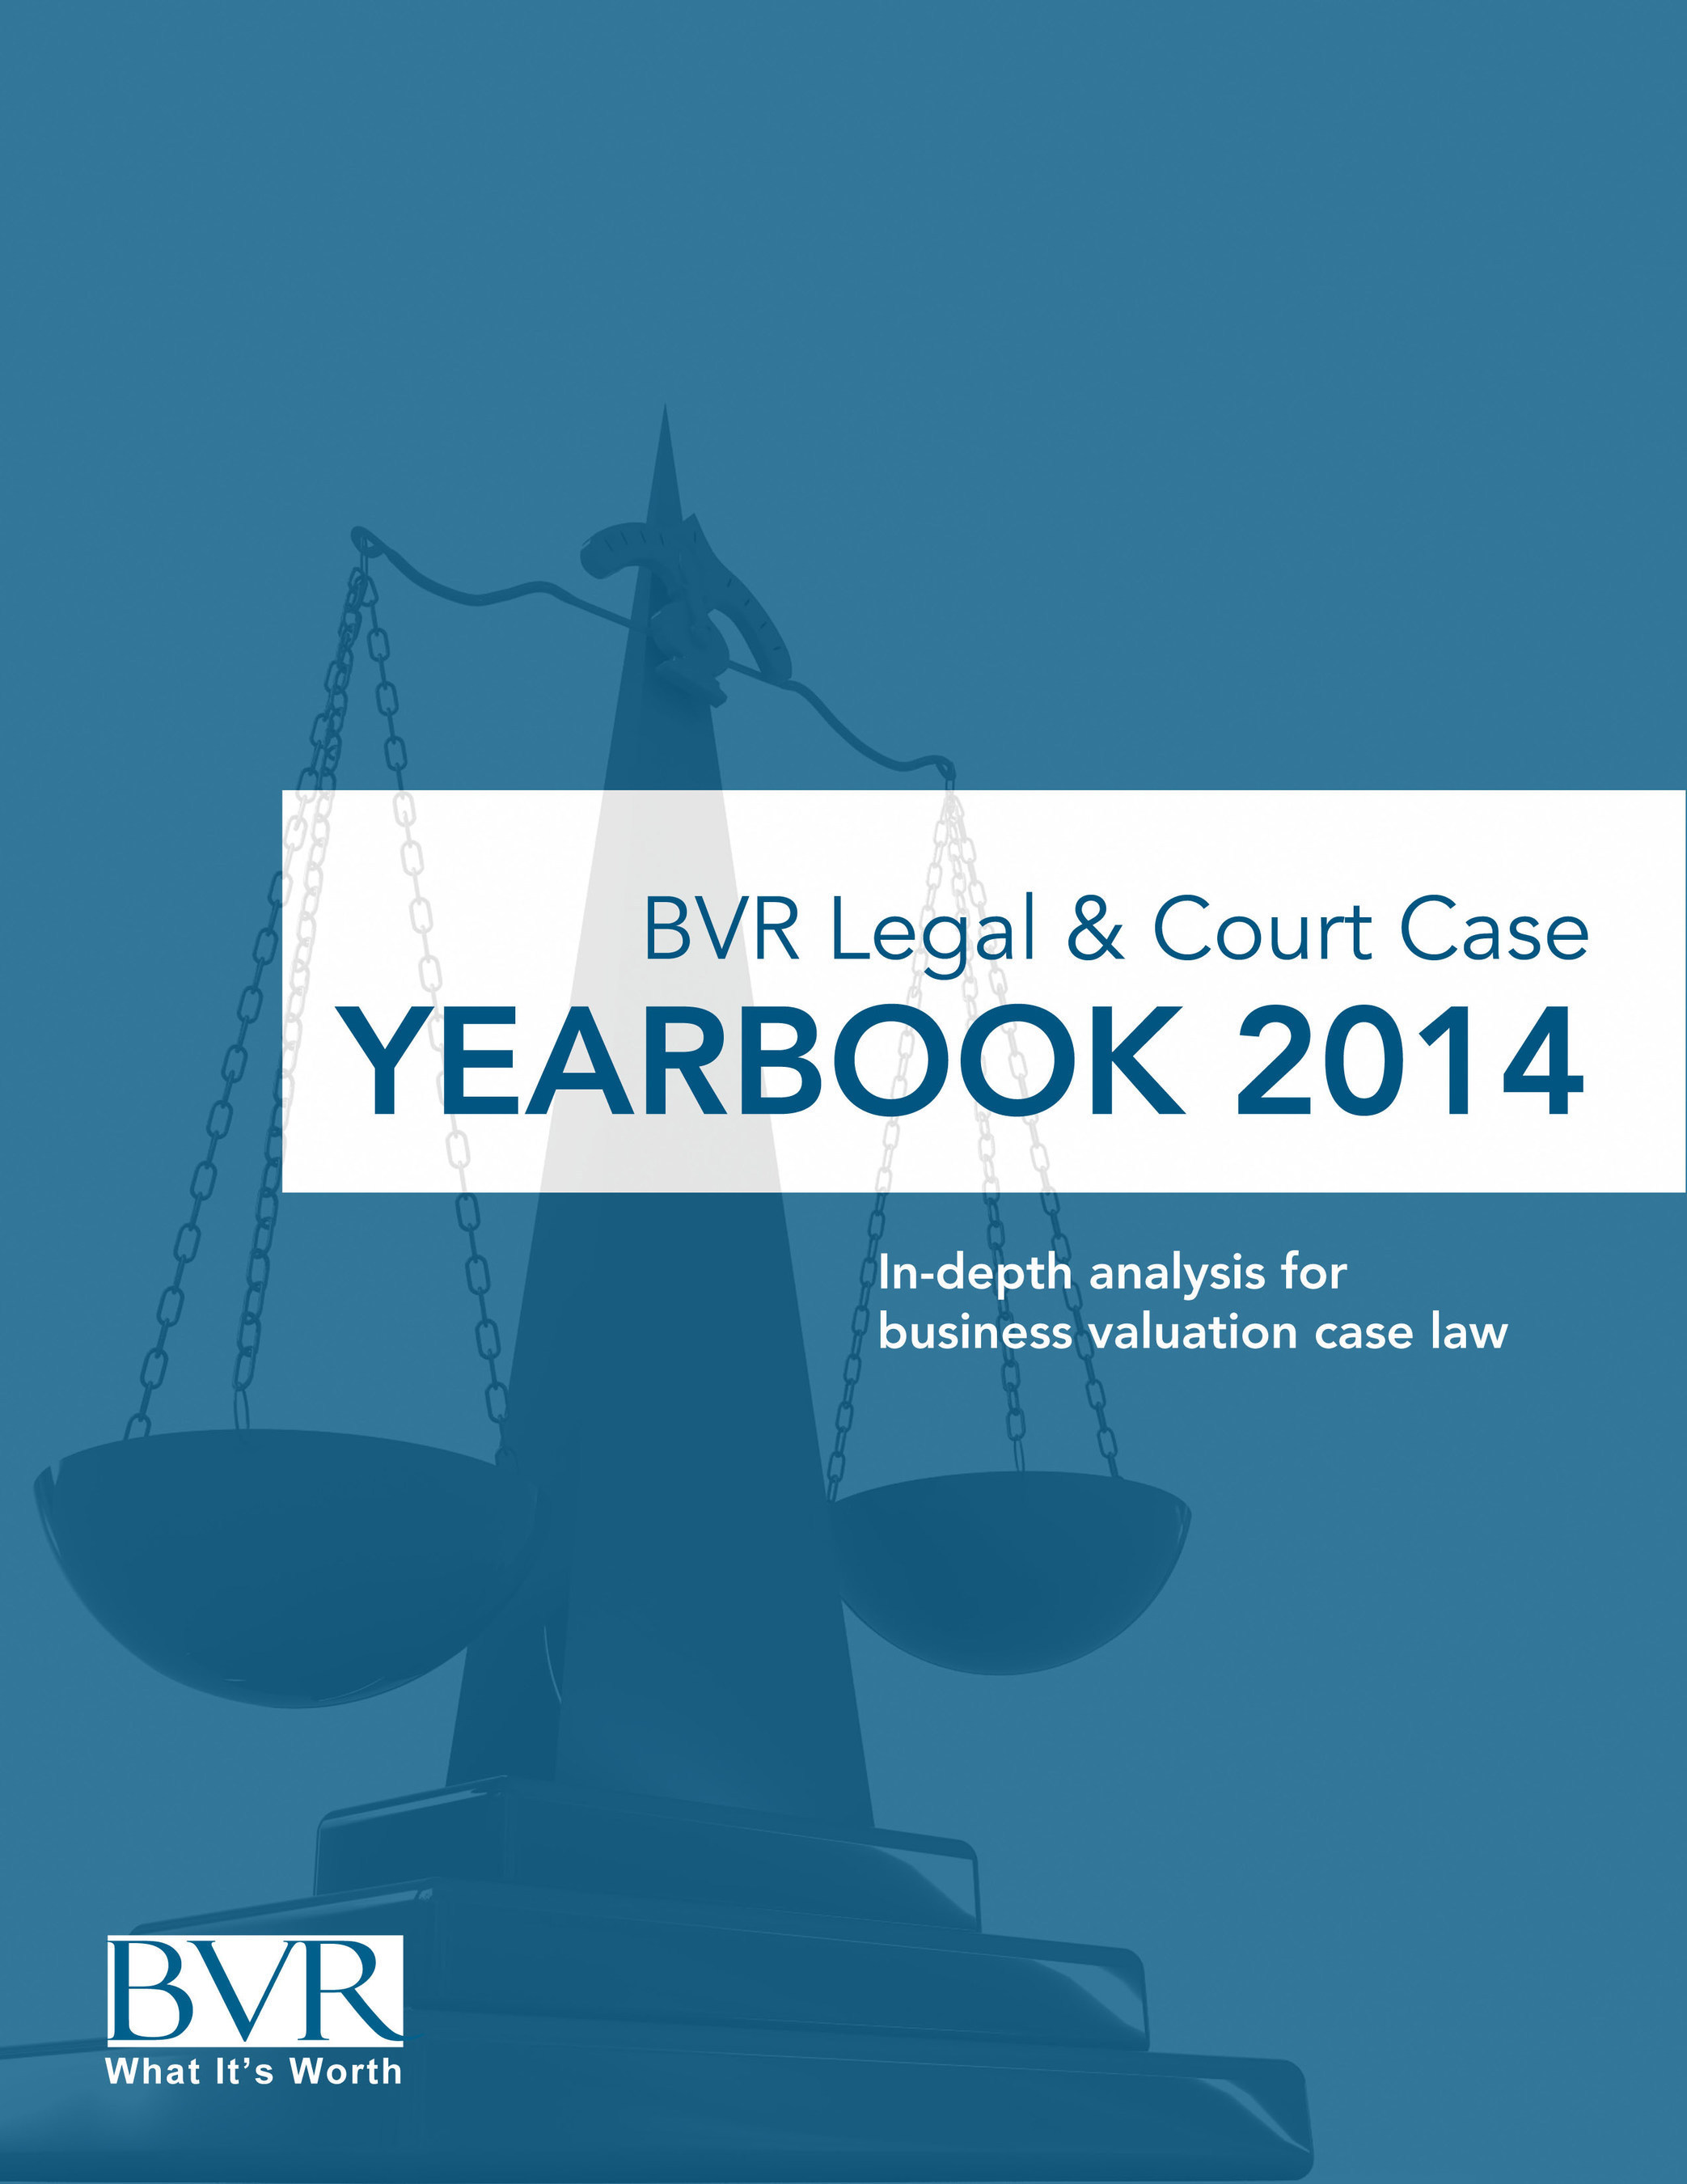 BVR Legal and Court Case Yearbook, 2014 (PRNewsFoto/Business Valuation Resources)